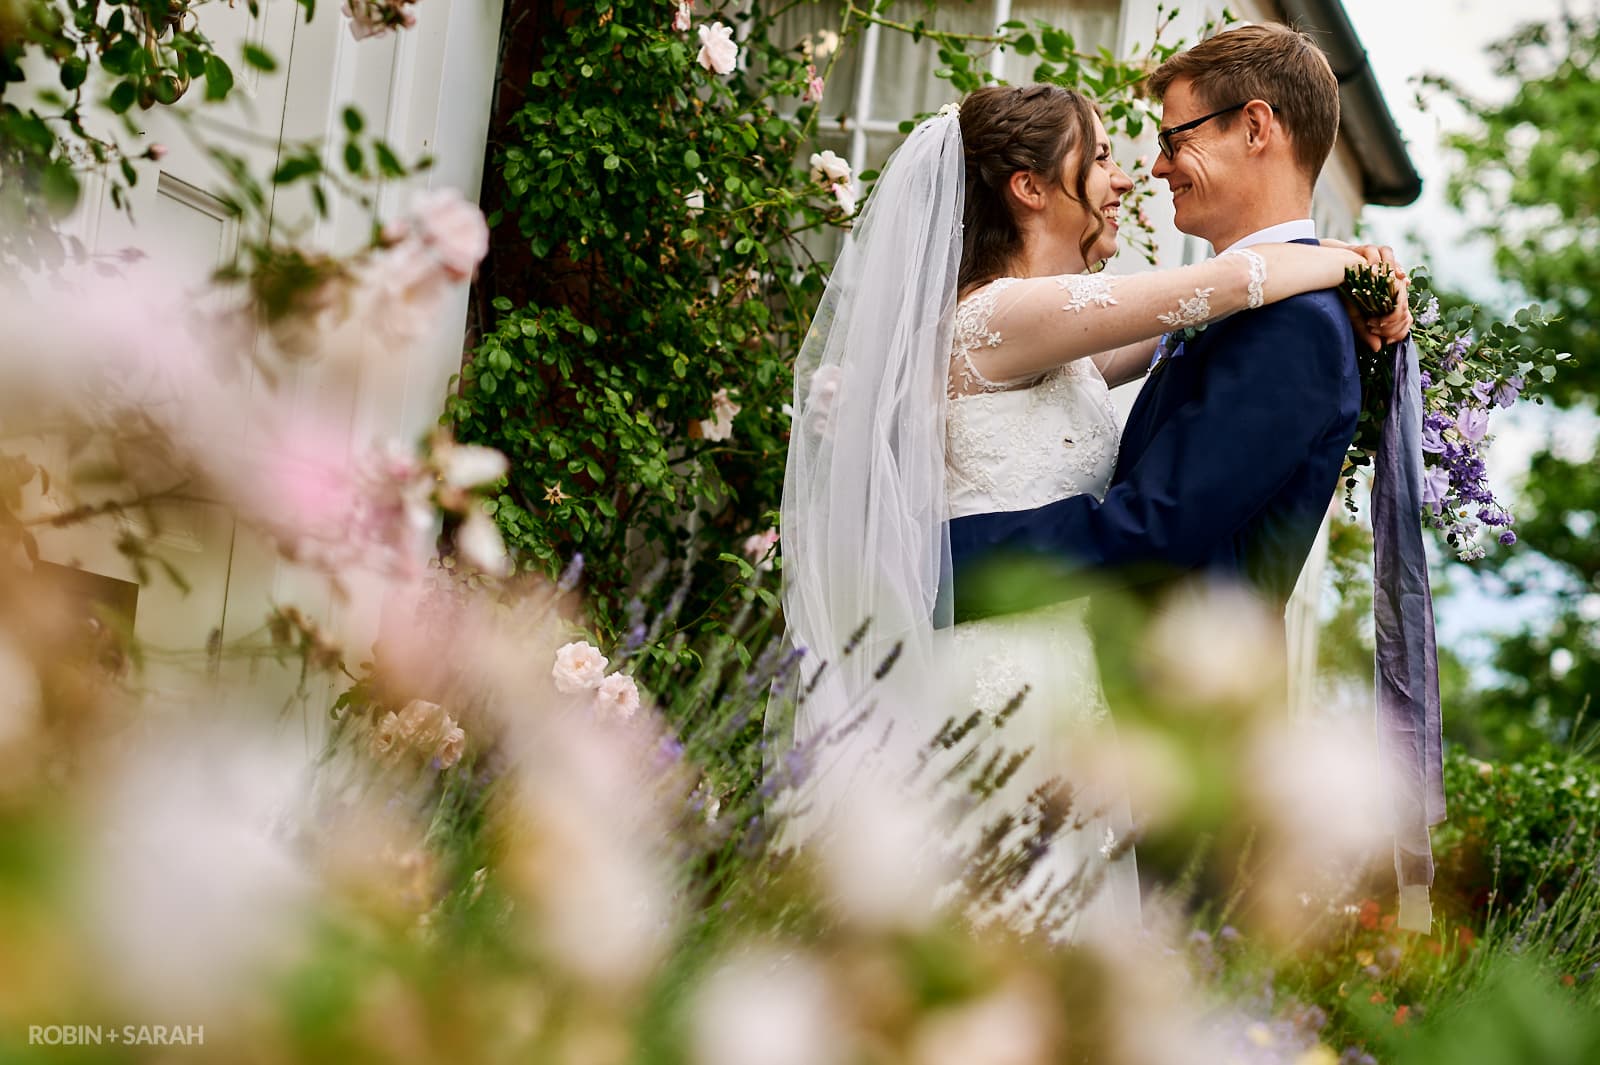 Bride and groom at Wethele Manor surrounded by summer flowers